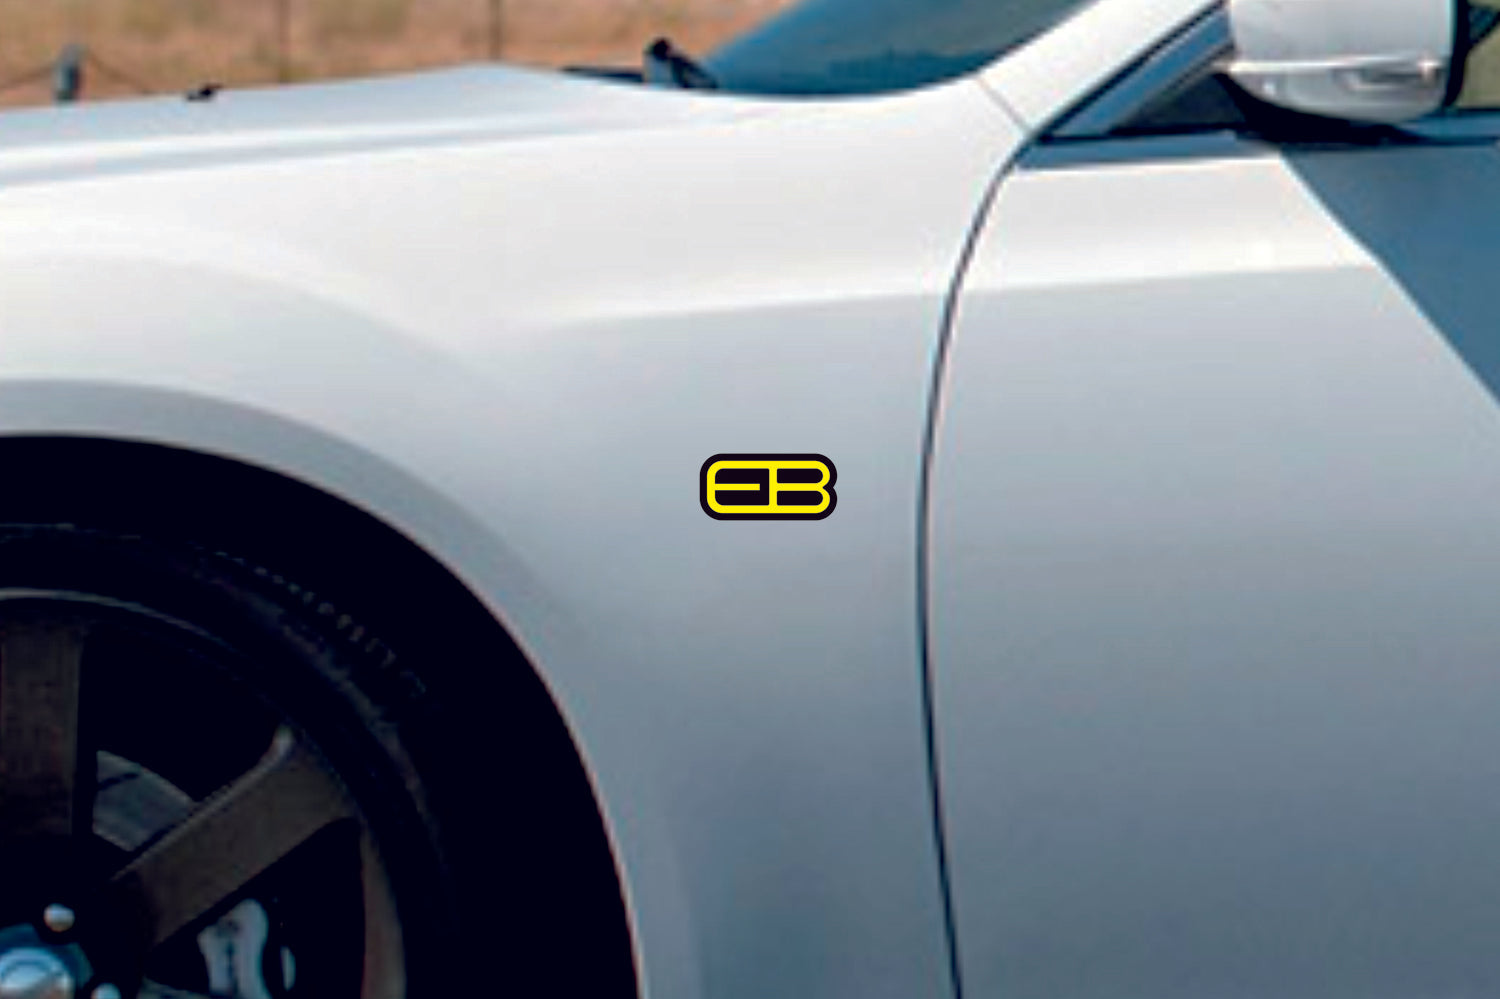 Ford emblem for fenders with EB logo